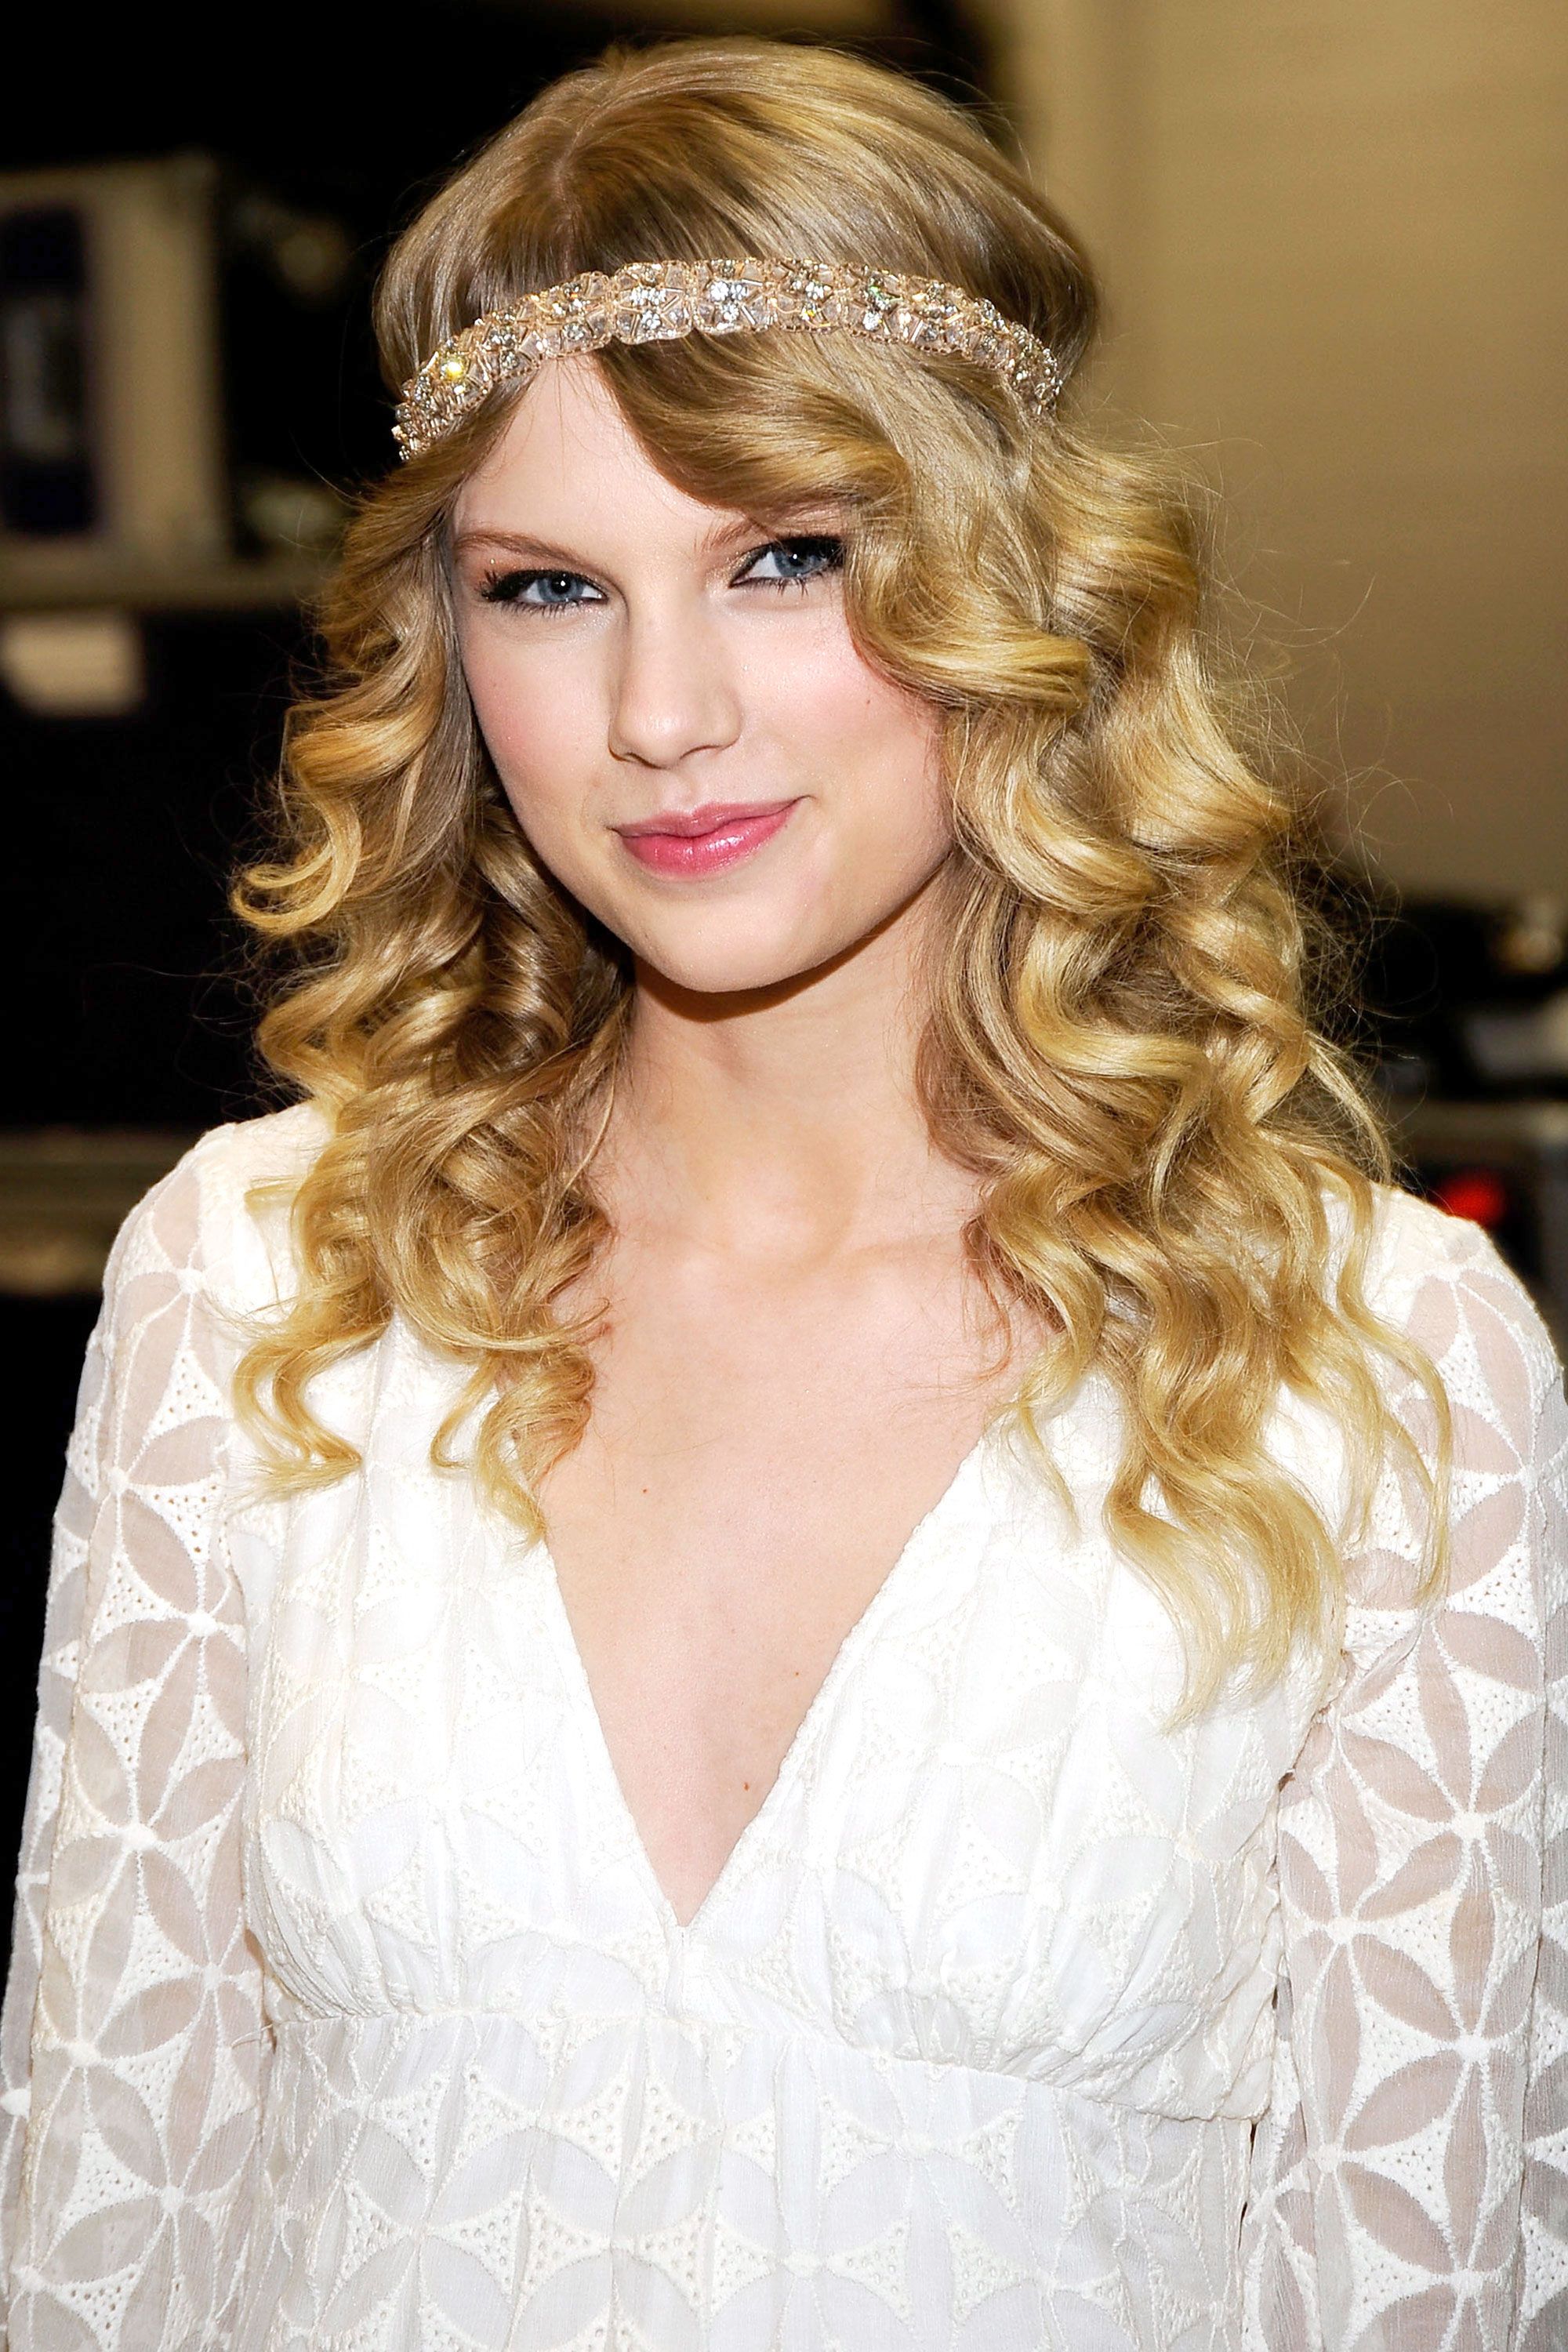 How To Style Curly Hair Like Taylor Swift Taylor Swift Haircuts 30